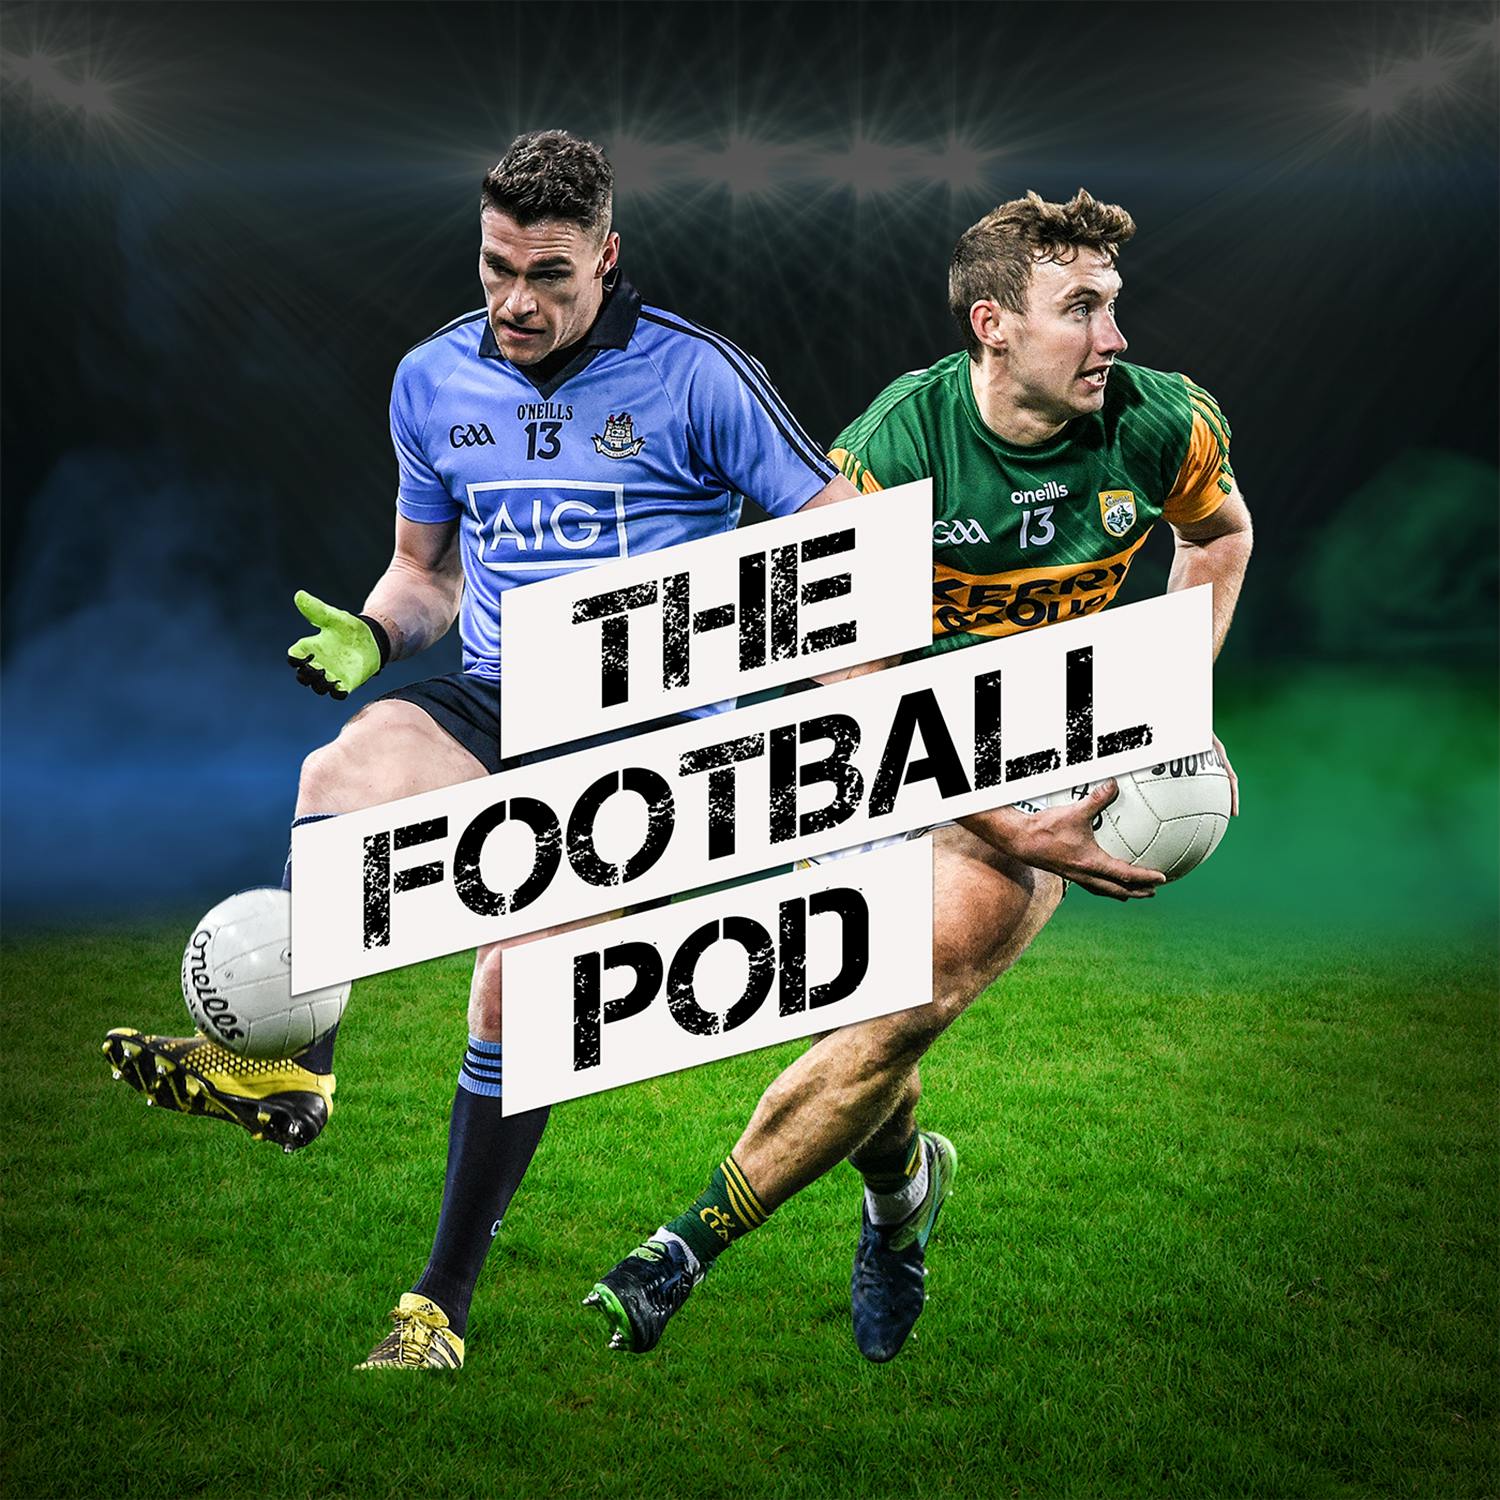 Tyrone-Donegal fallout, Attacking with width, Crazy Comebacks, Meath u20s hijack the pod